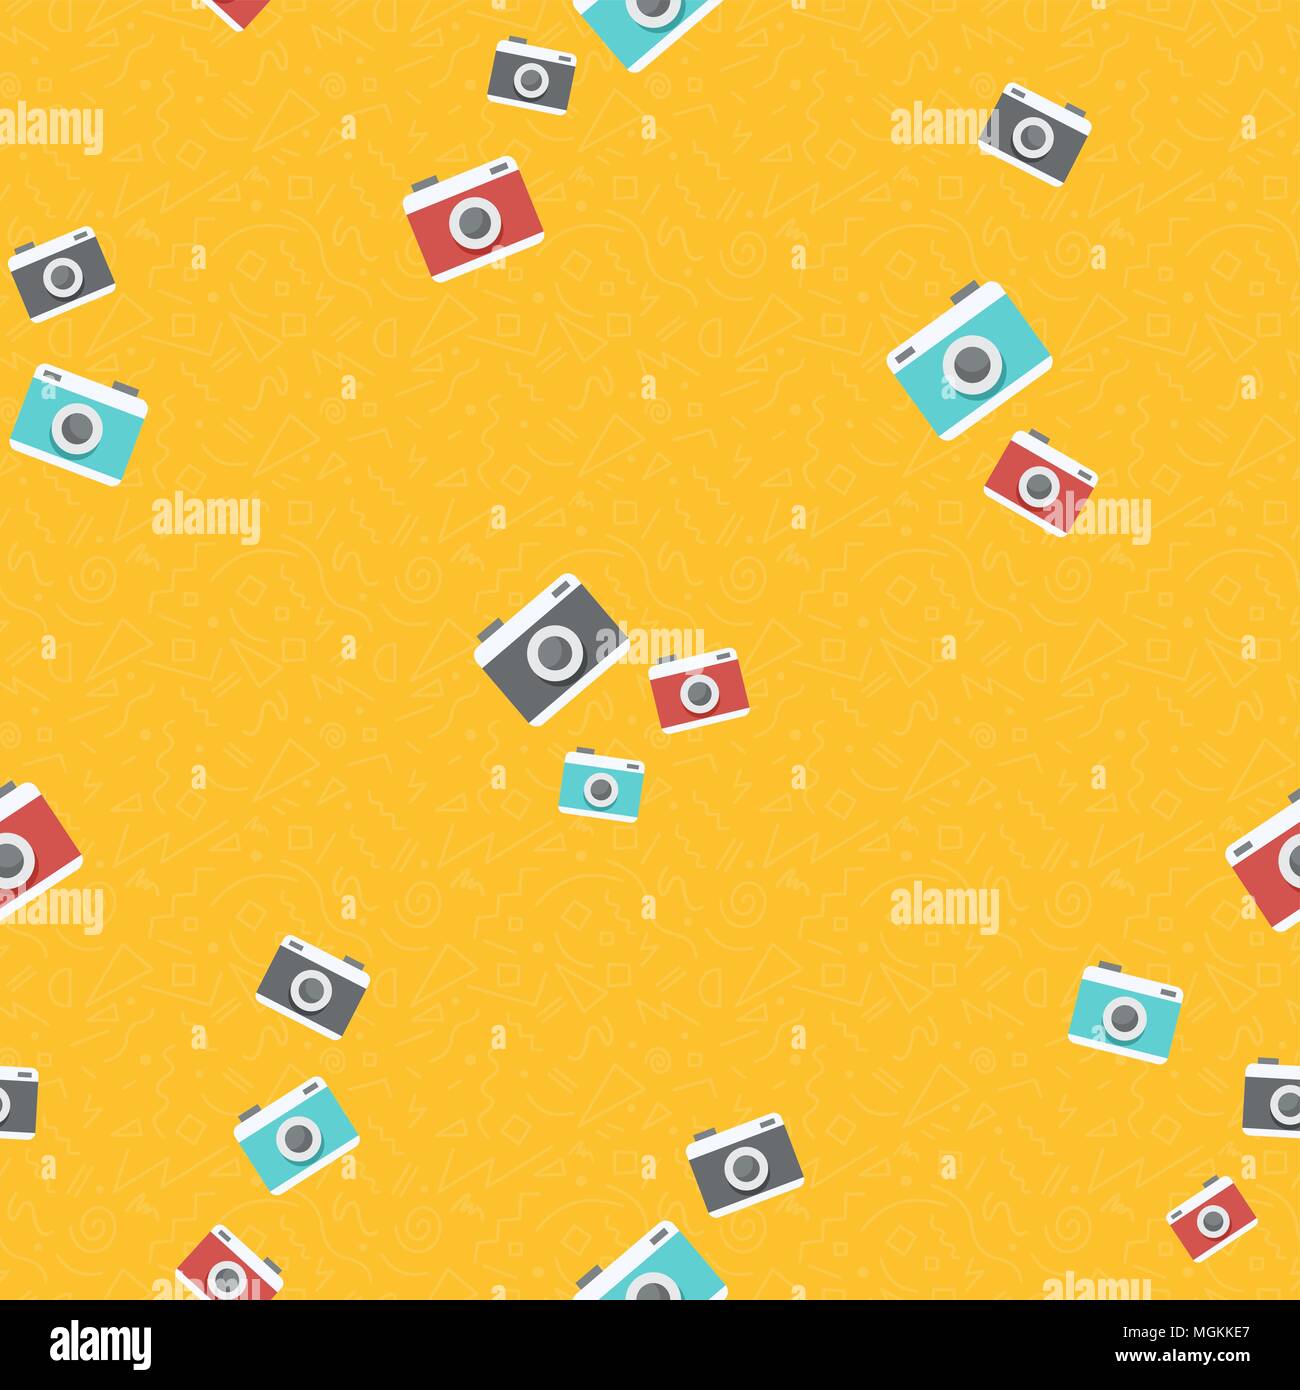 Seamless pattern of colorful retro photo cameras. Vintage photography equipment background illustration. EPS10 vector. Stock Vector